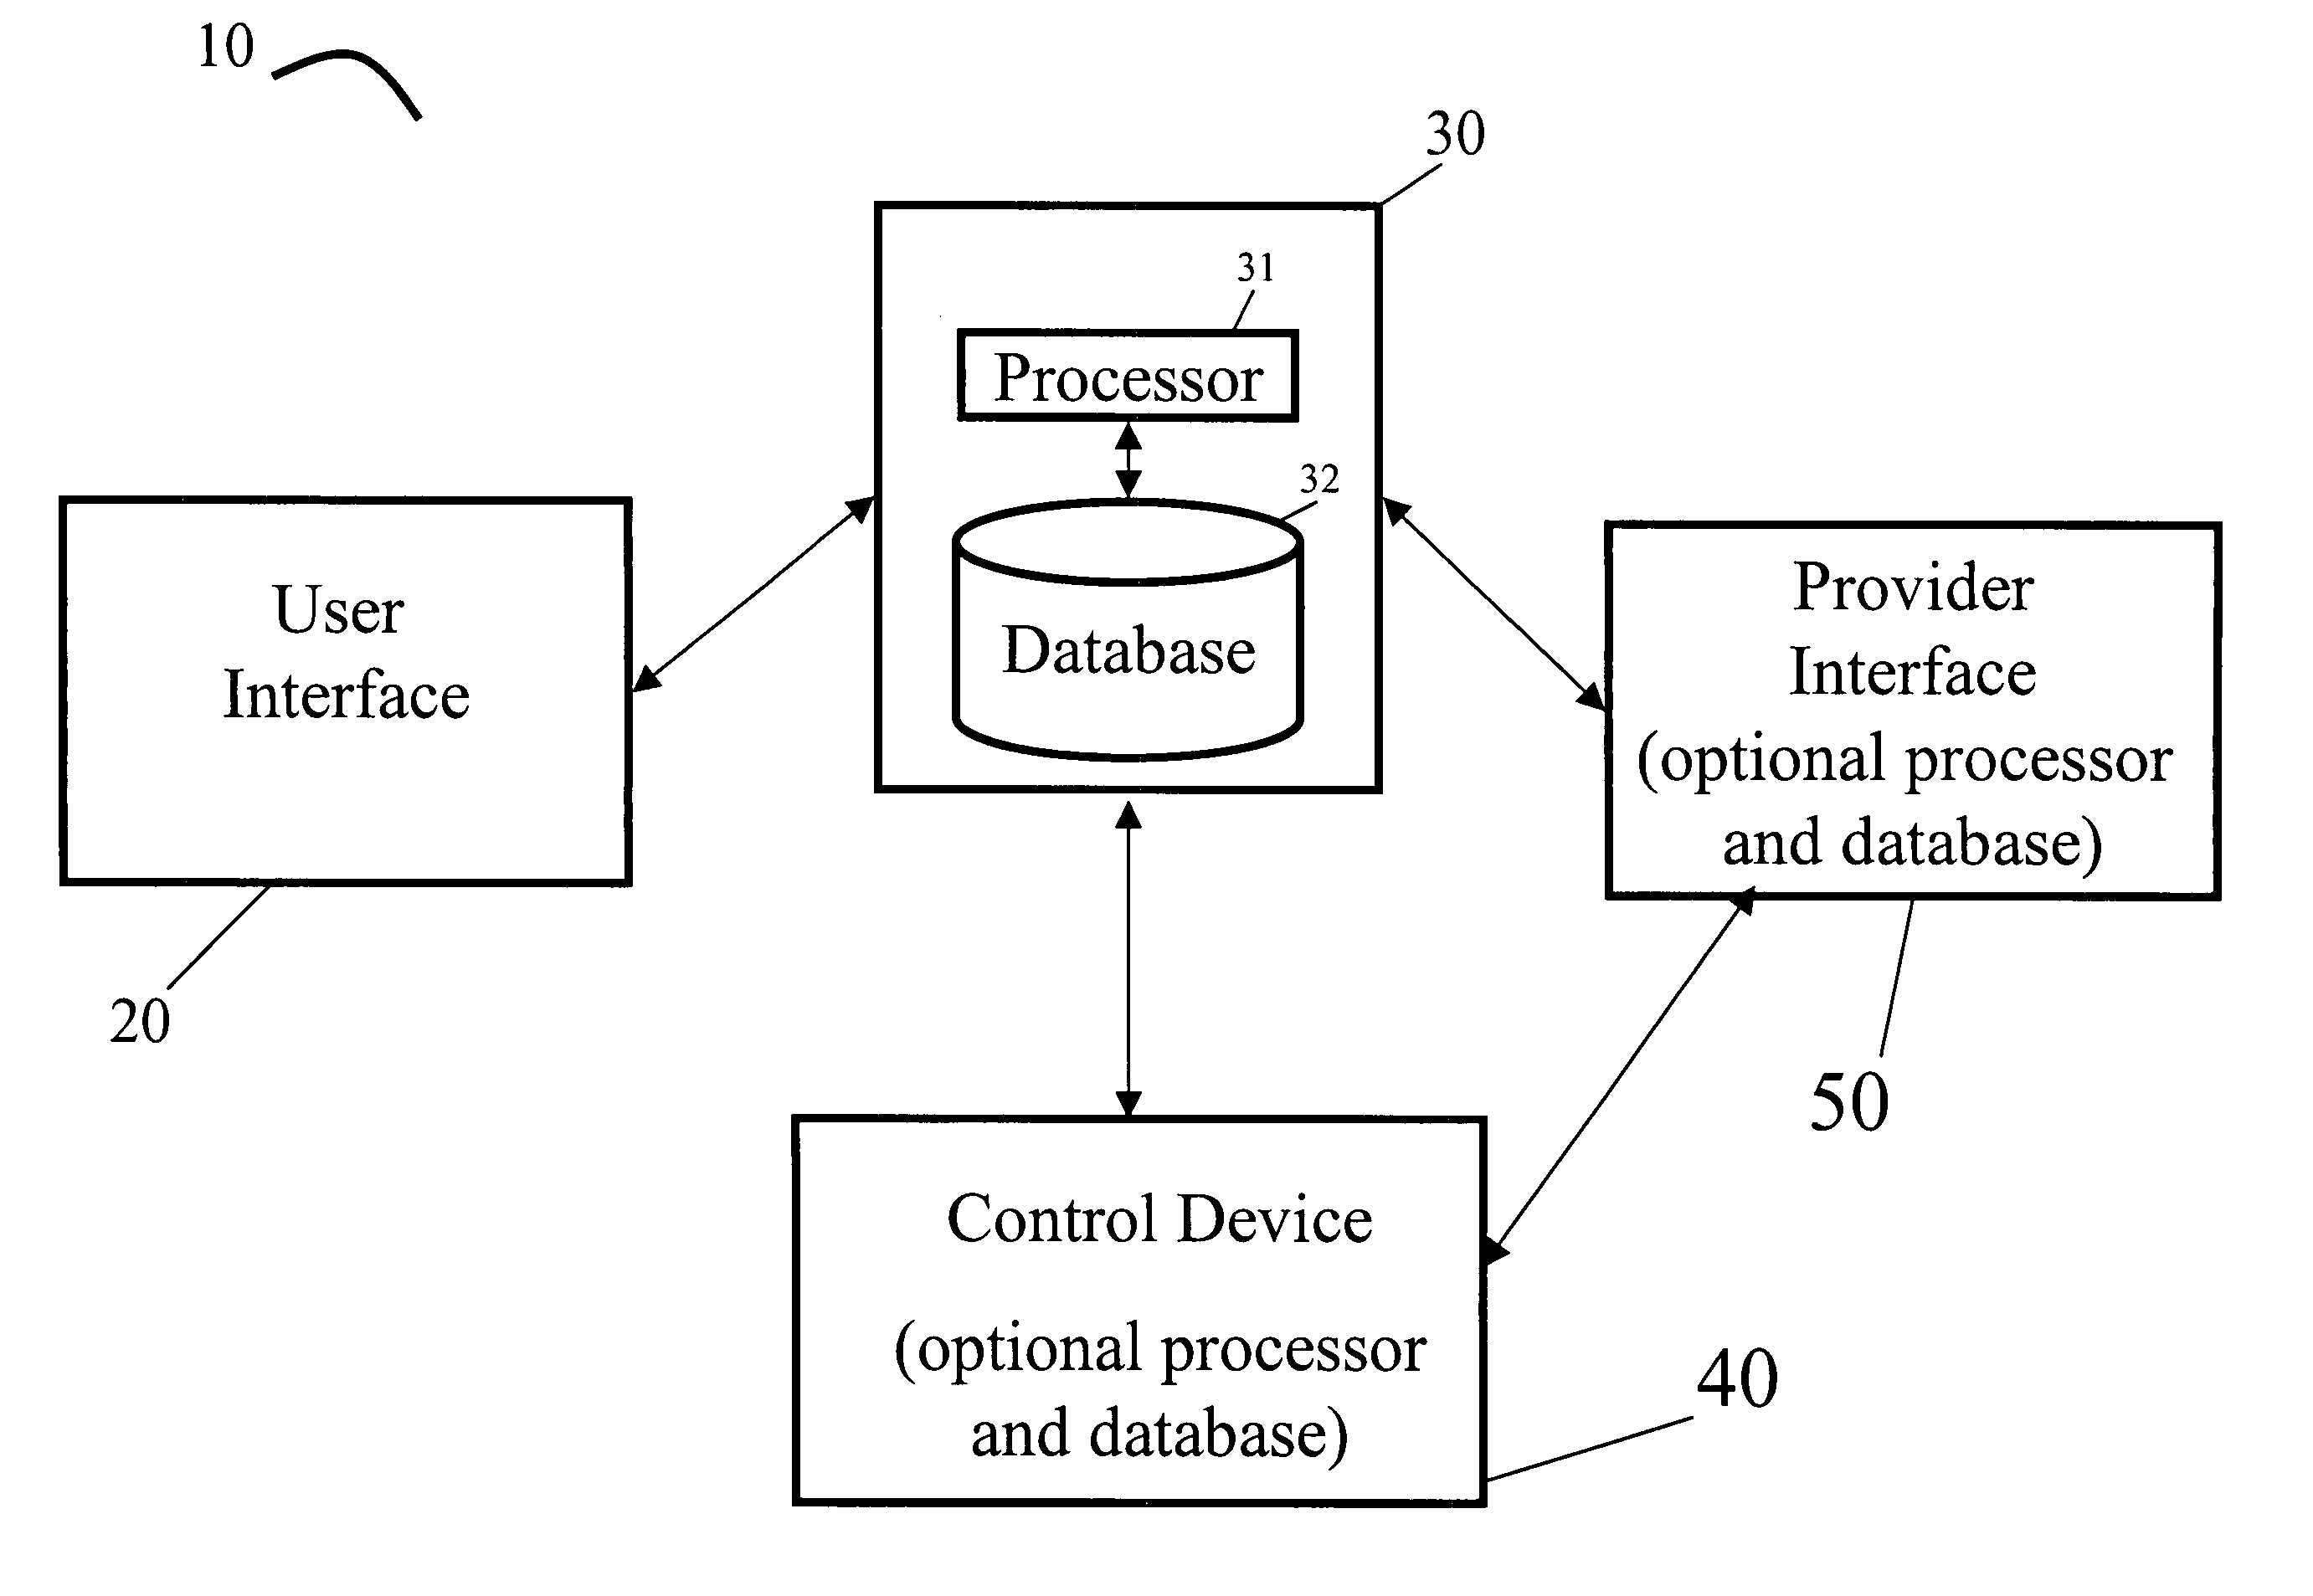 Systems and methods for managing buildings and finances